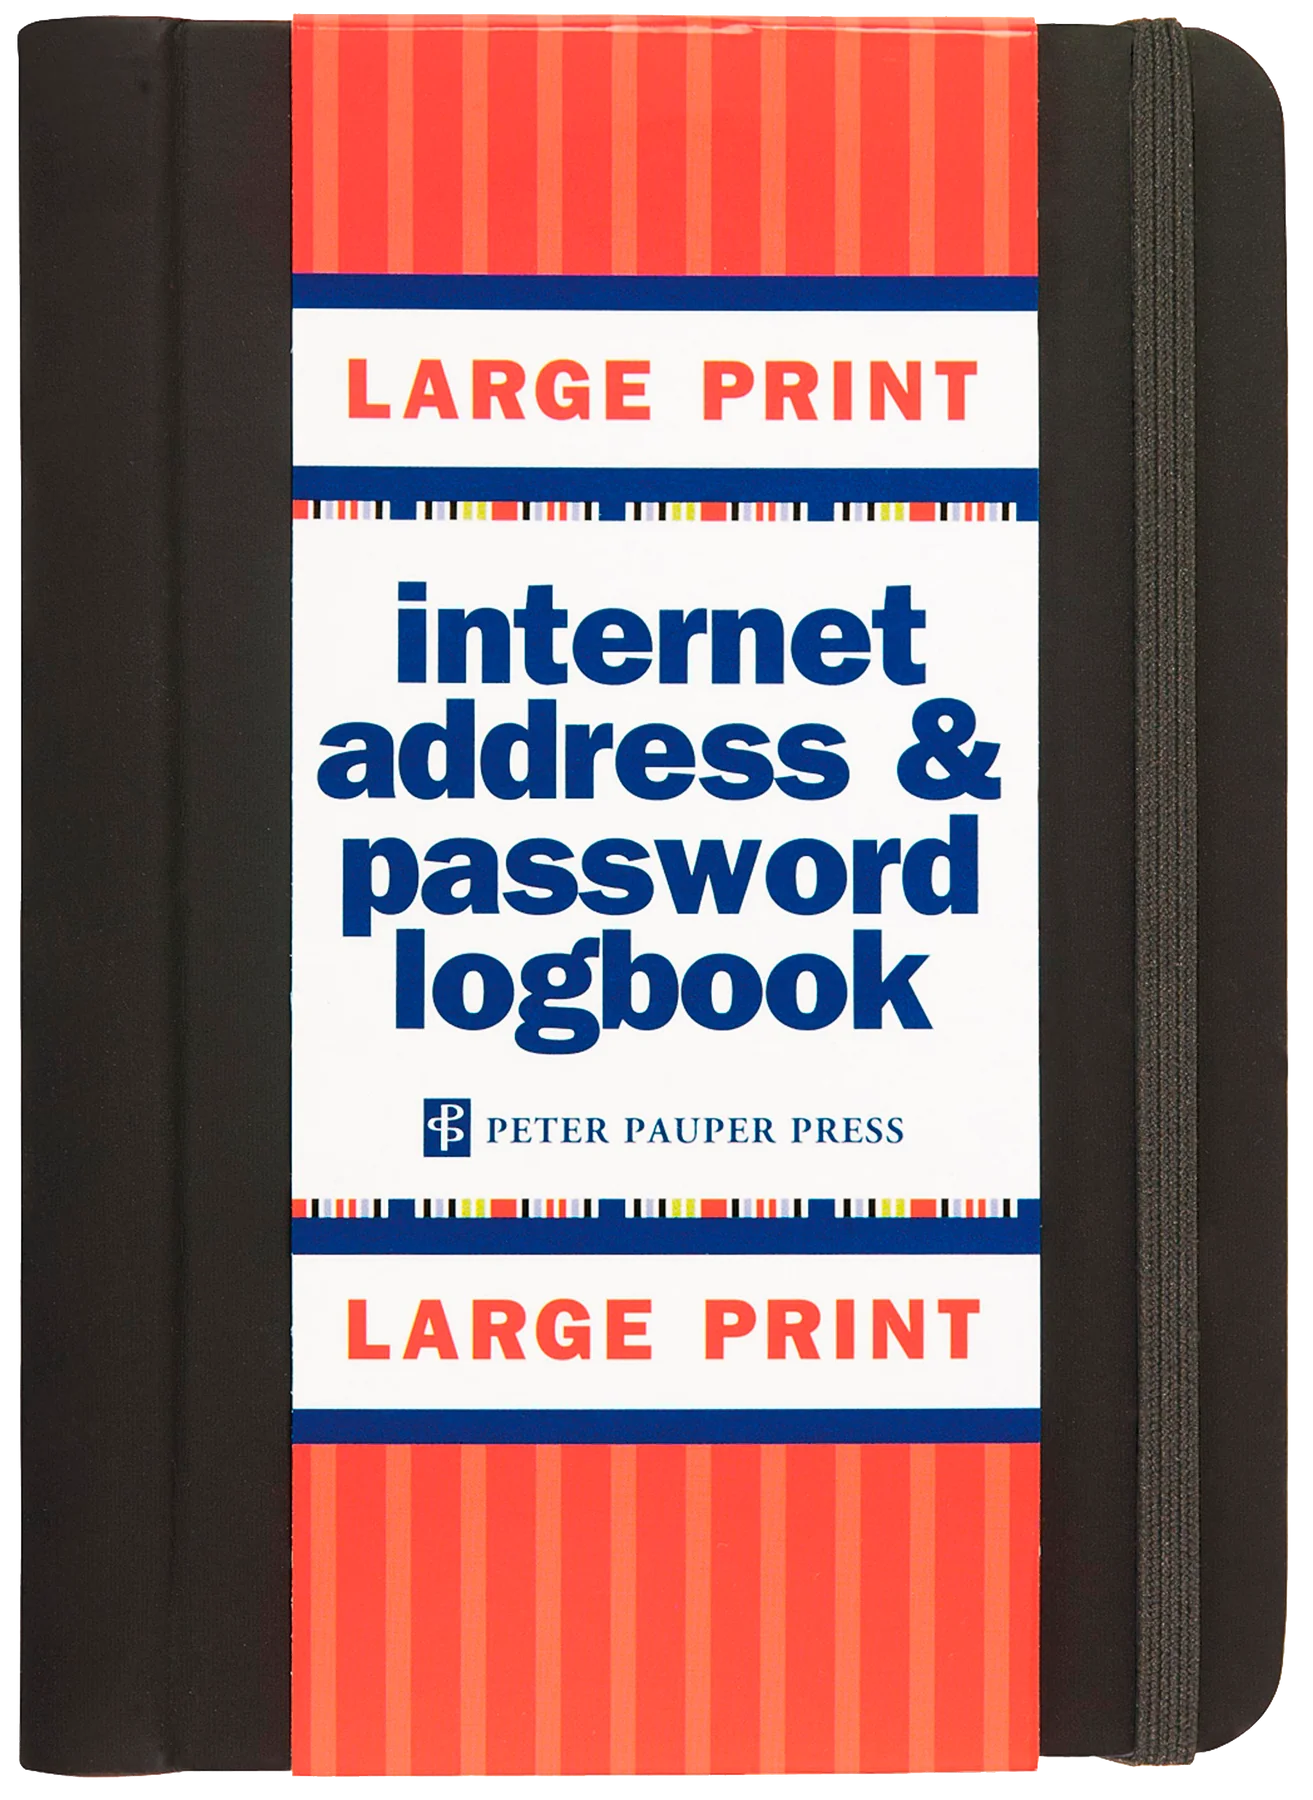 Small Internet Log Book with Large Print